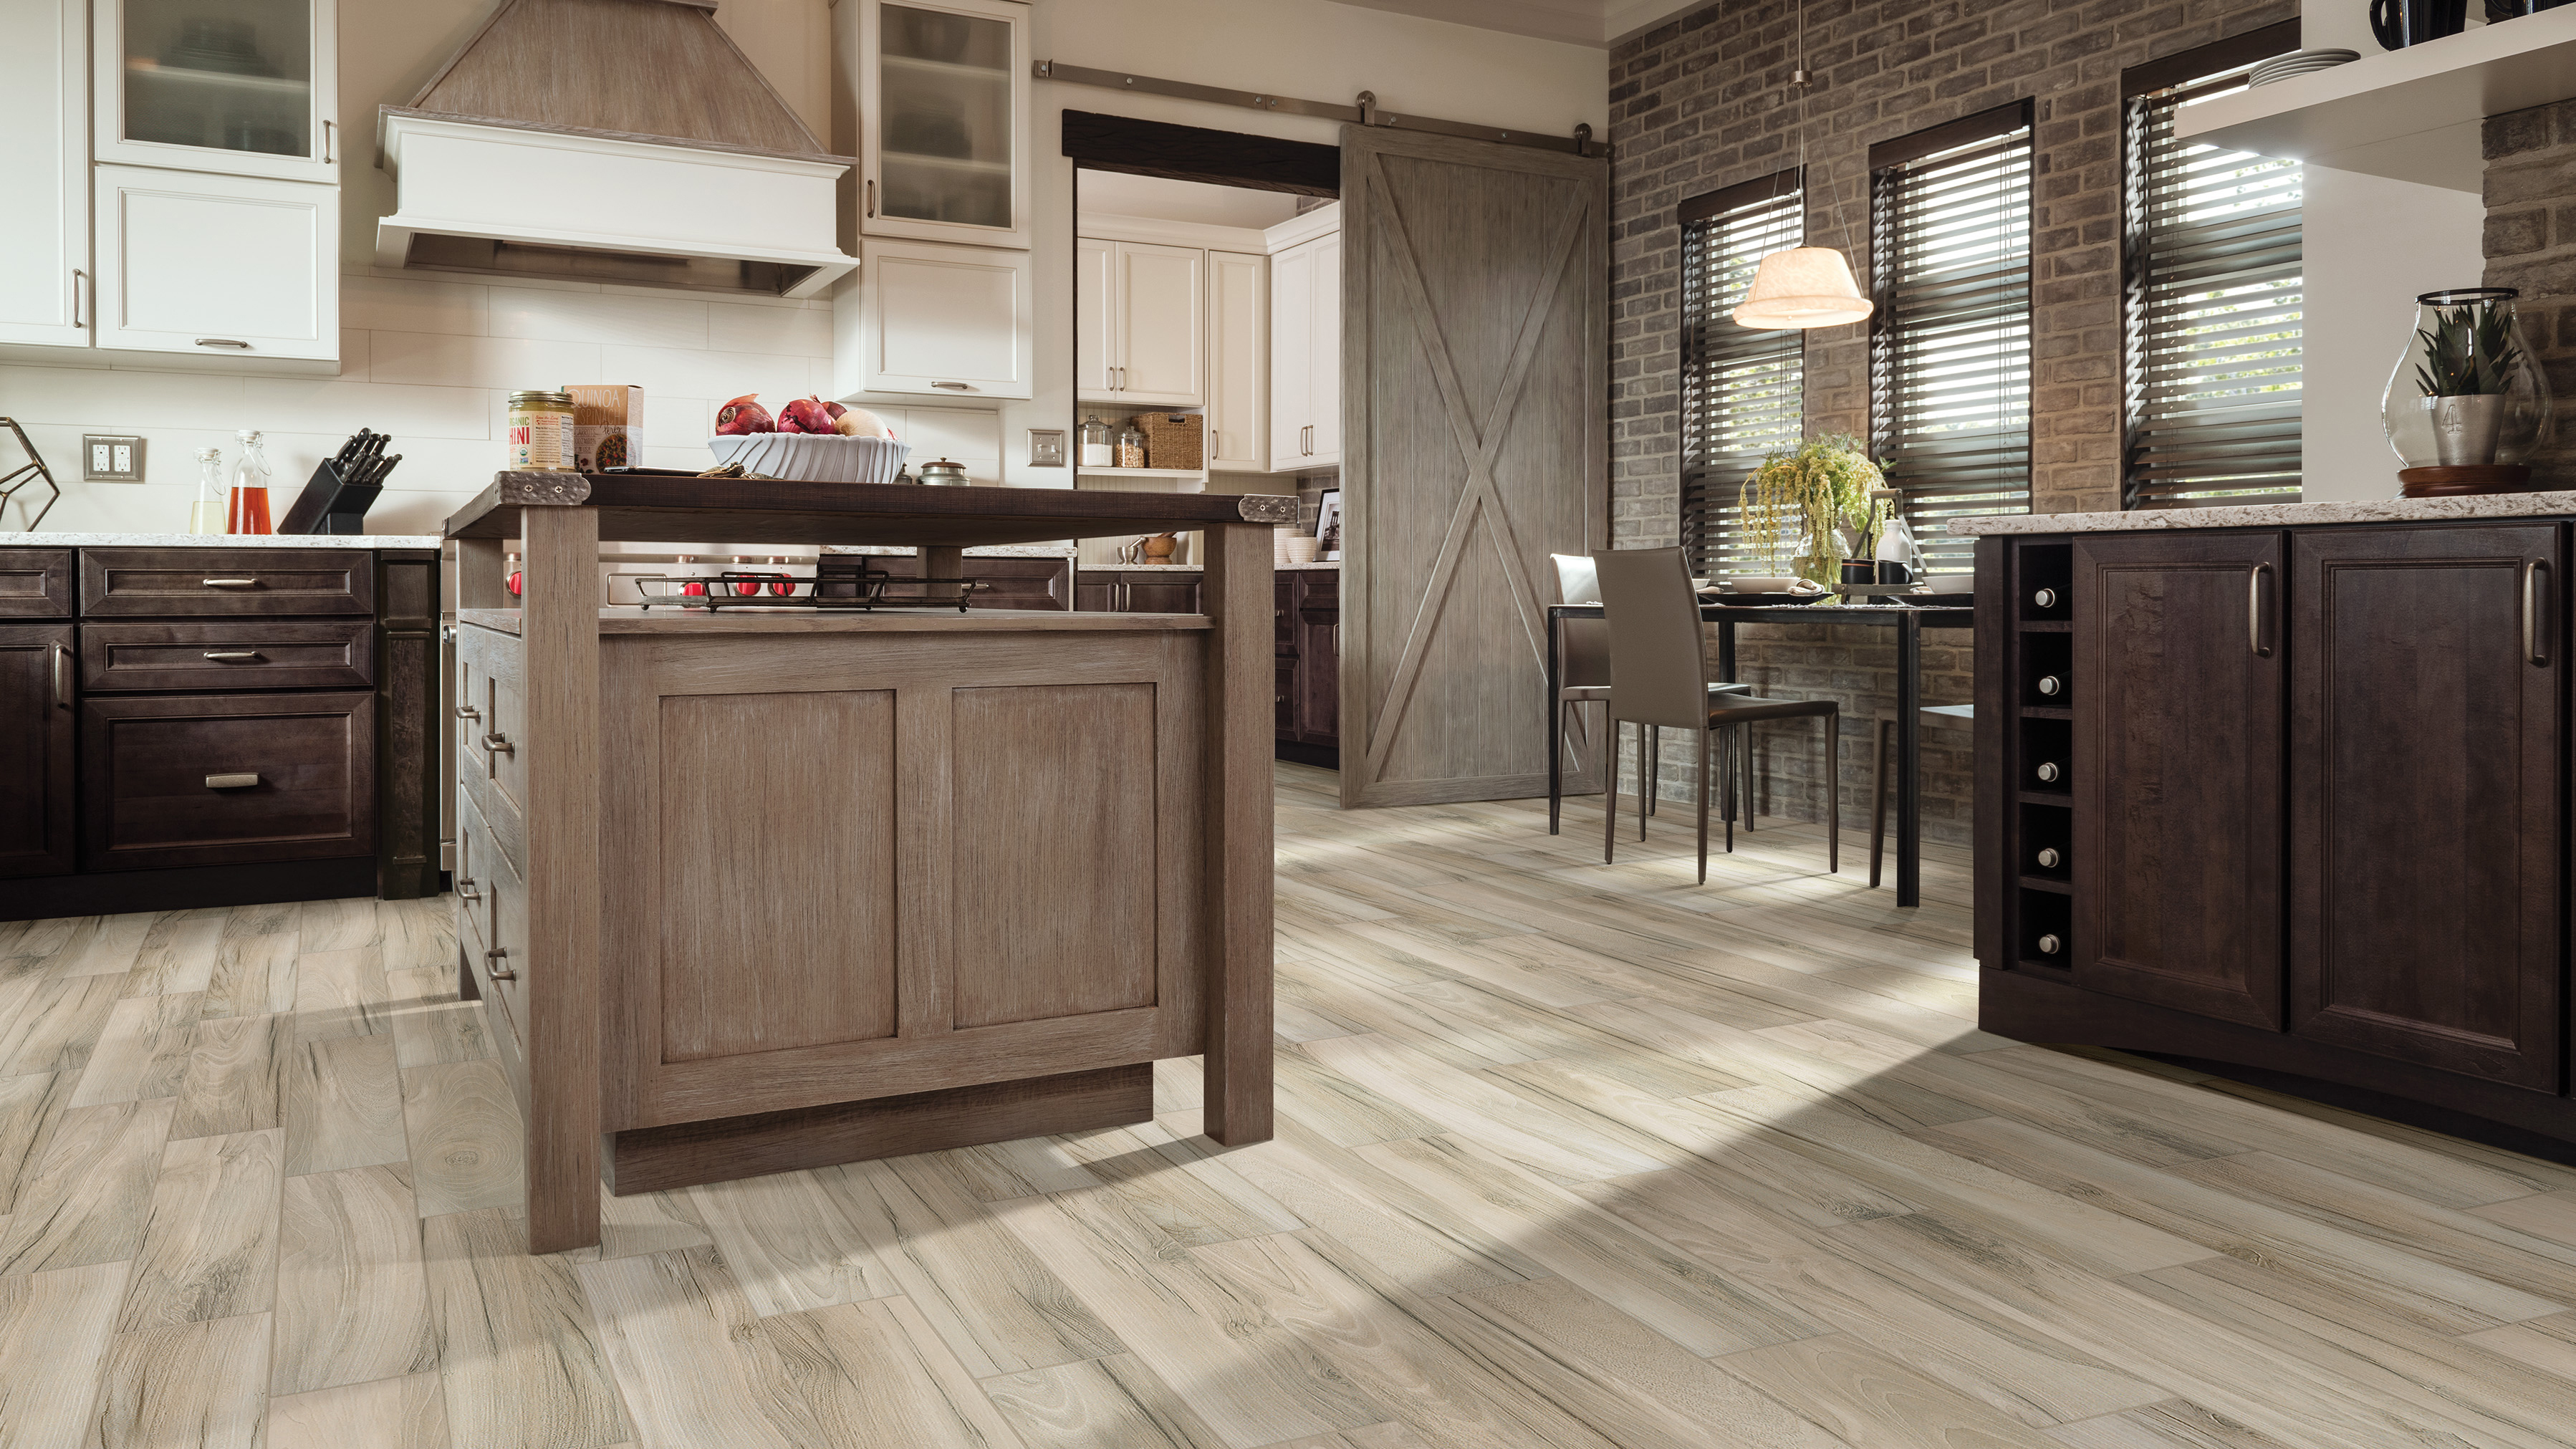 Wood-look tile flooring in a kitchen.